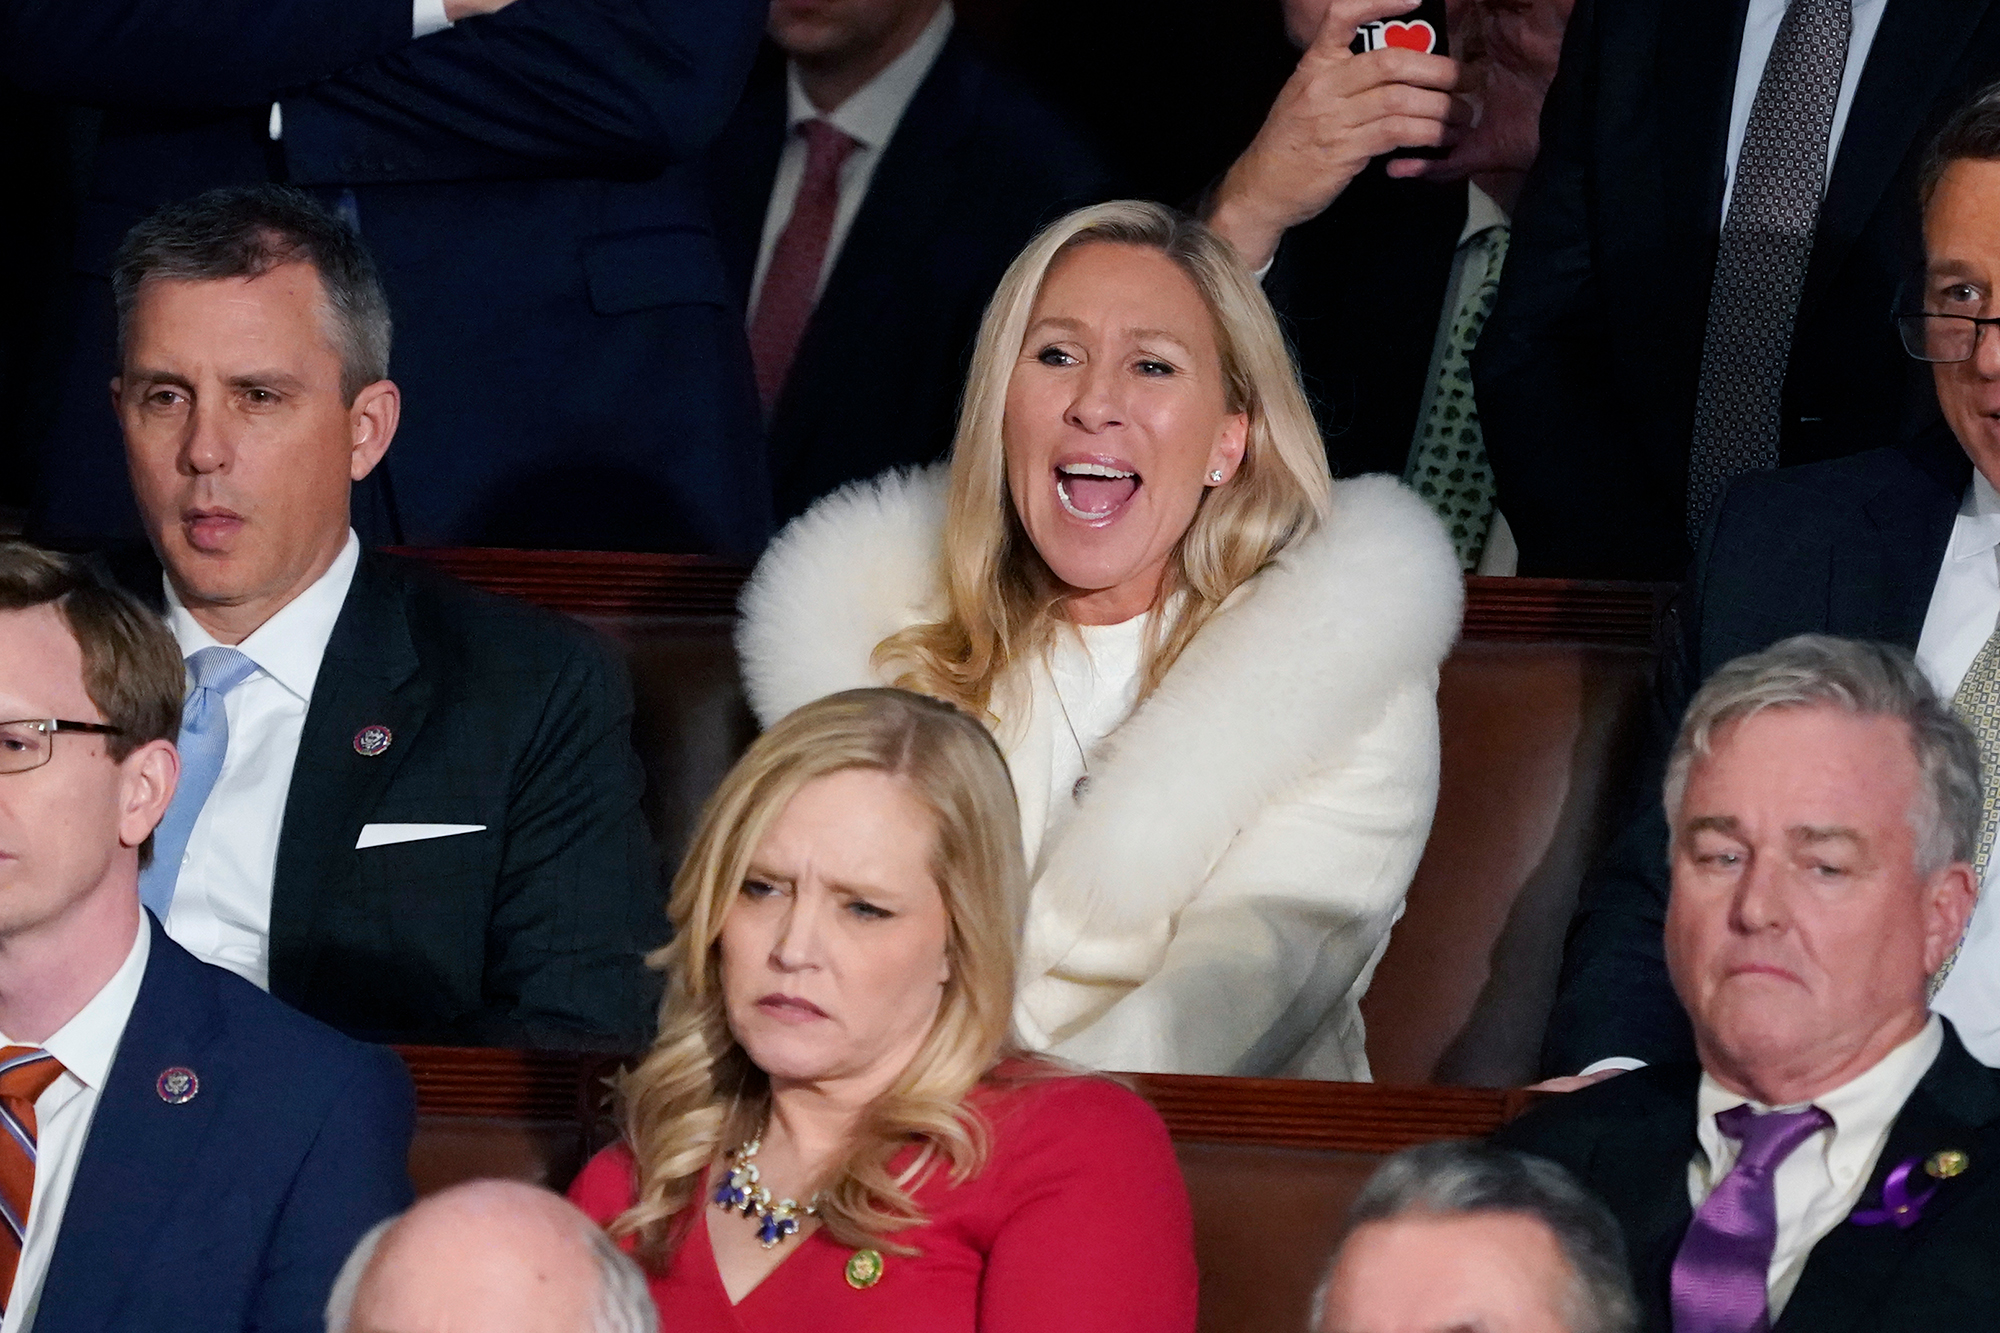 Rep. Majorie Taylor Greene listens and reacts as President Joe Biden delivers his State of the Union speech.